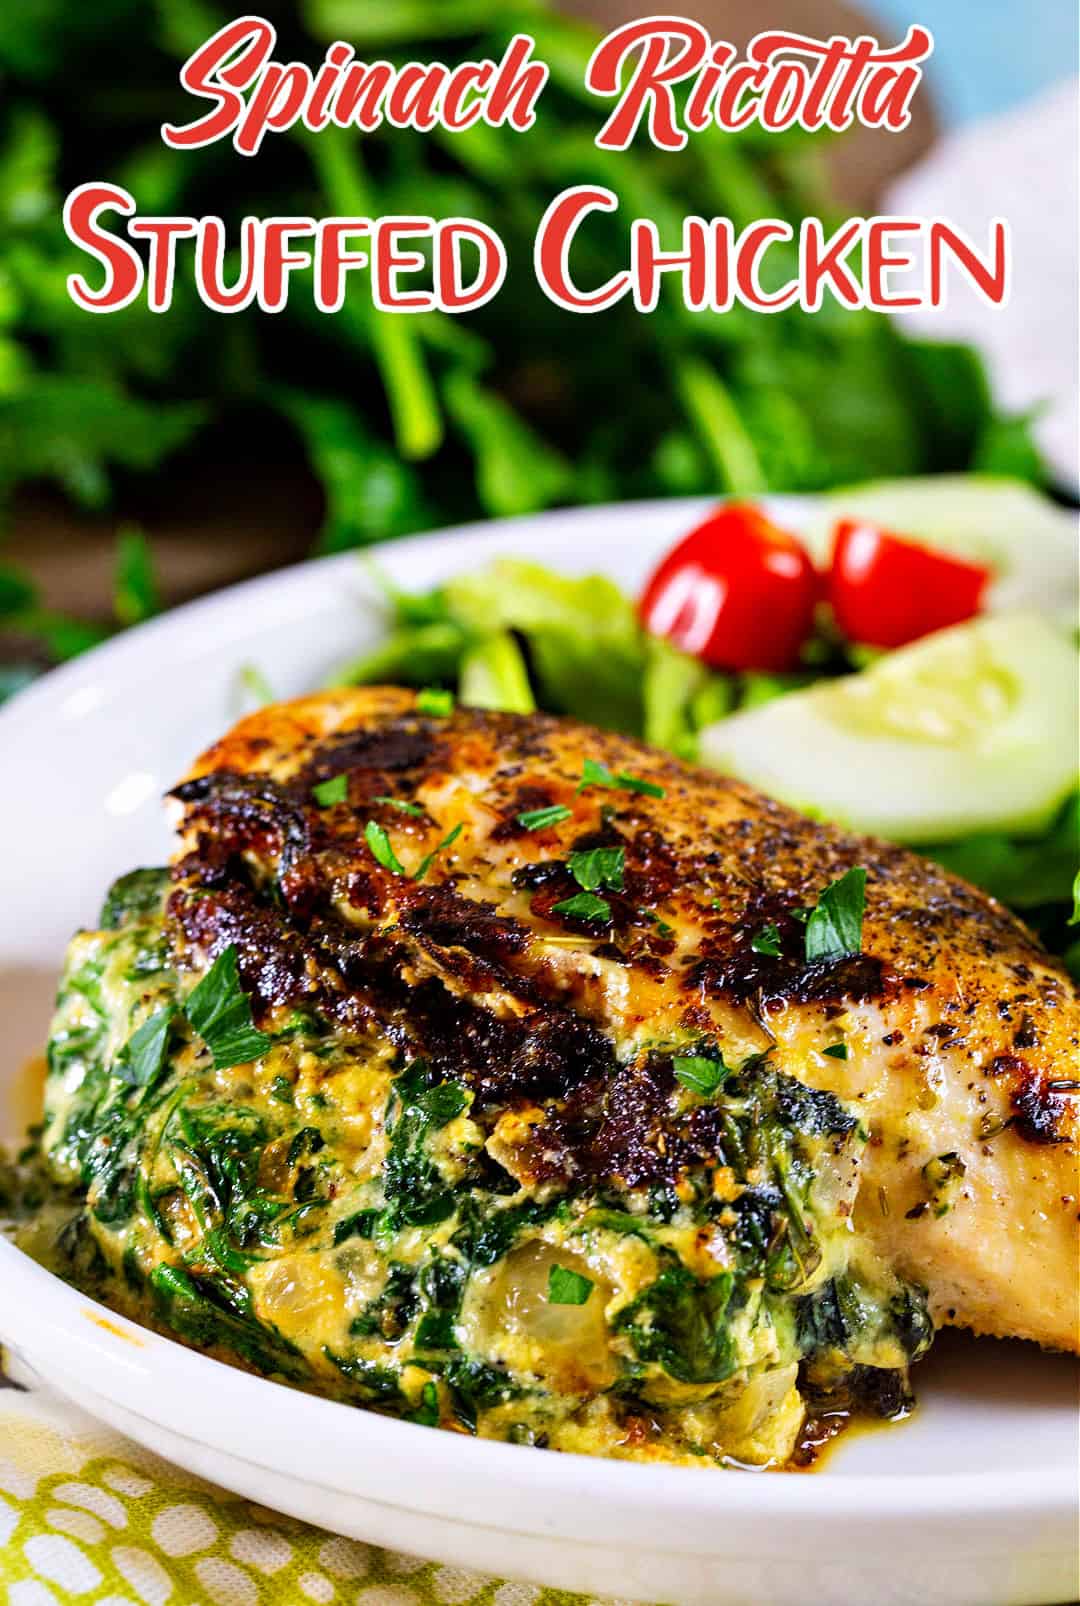 Spinach Ricotta Stuffed Chicken on a plate with salad.